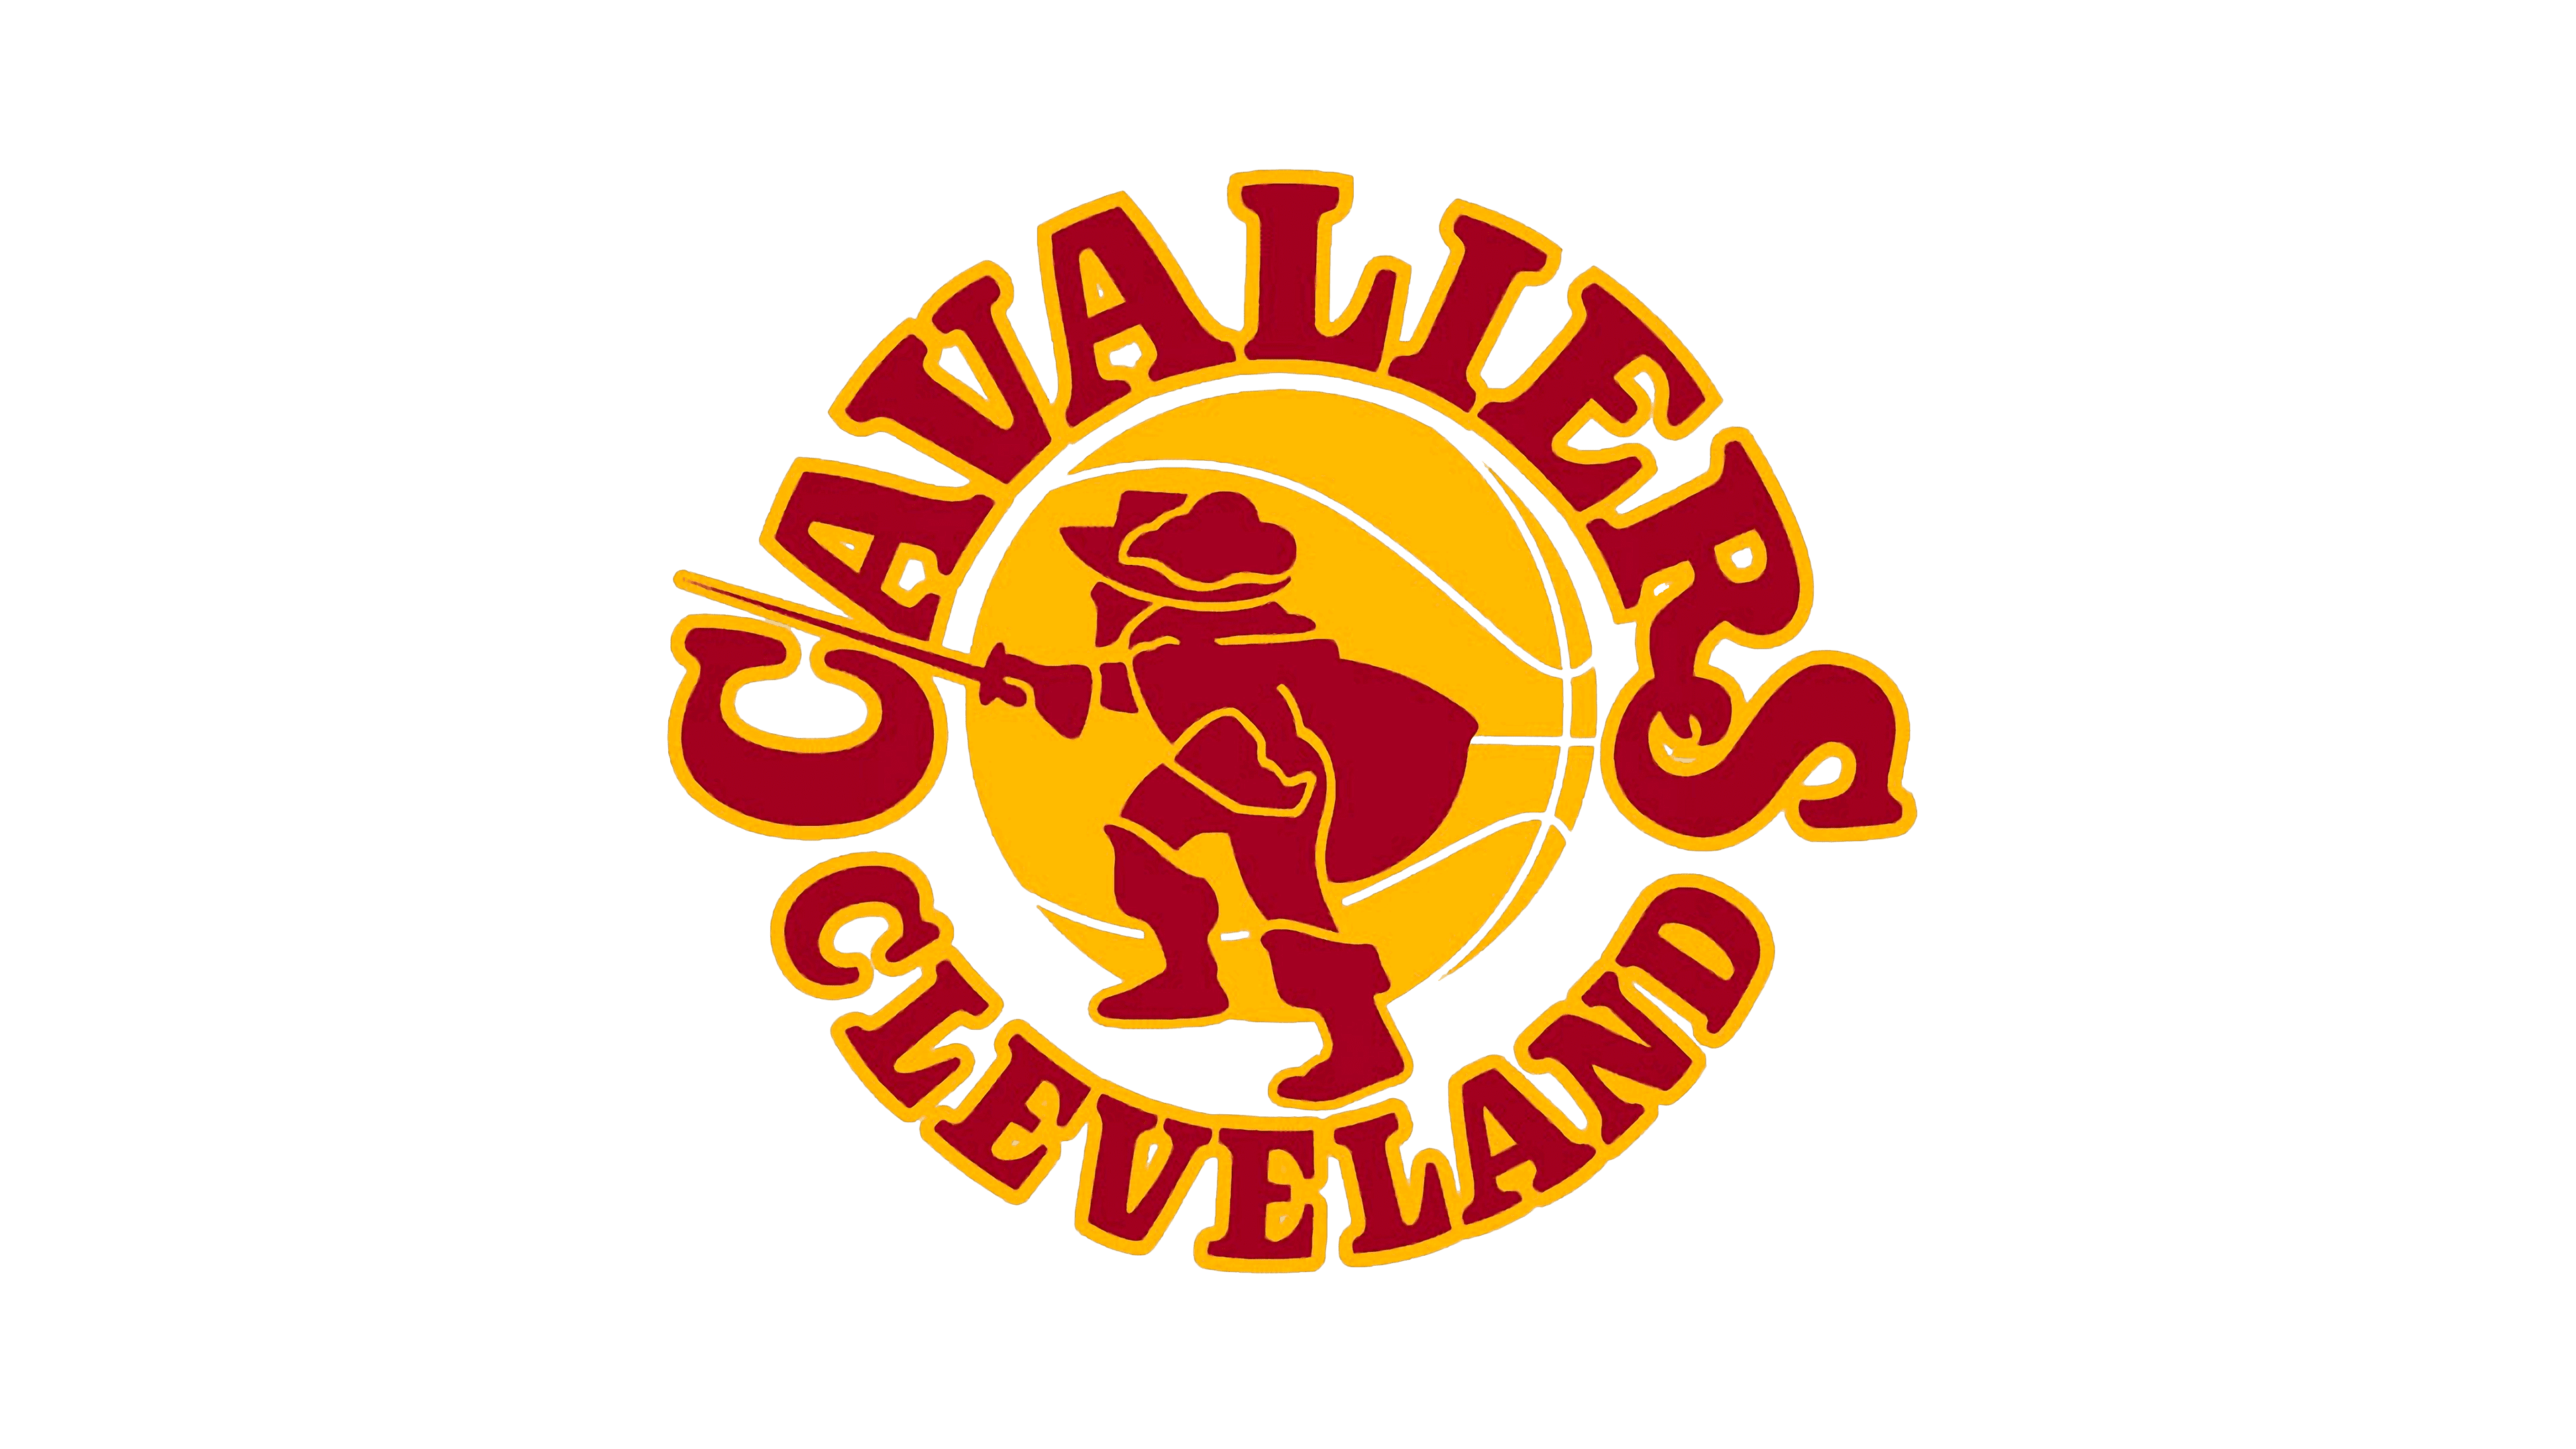 Download Cleveland Cavaliers HQ PNG Image